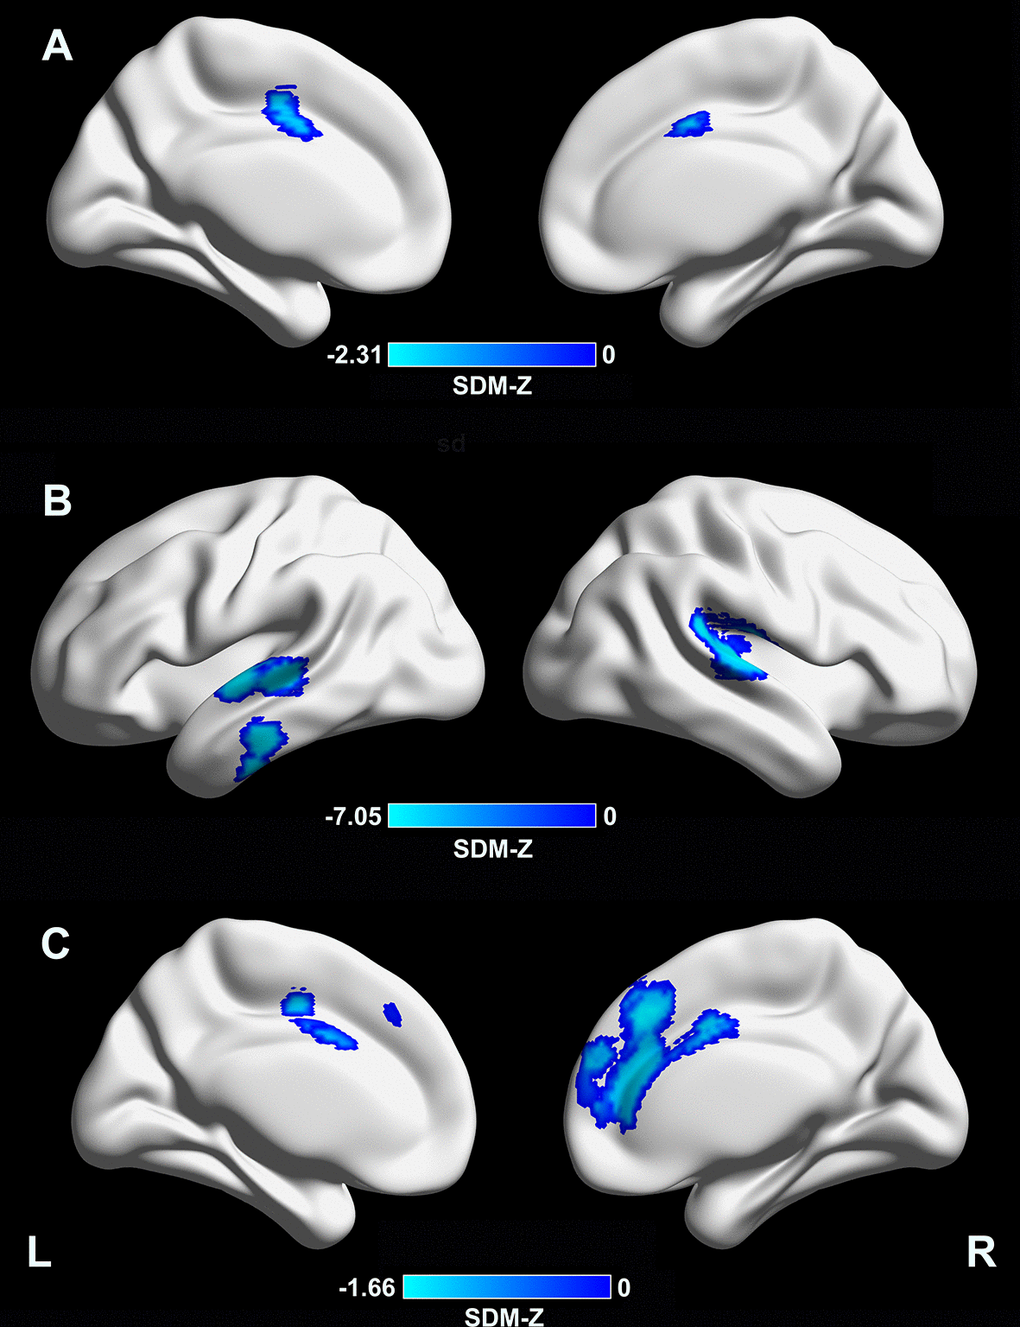 Meta-regression analyses of clinical variables with cortical thickness. (A) A longer disease duration was associated with lower CTh in the supplementary motor area/cingulate cortex (MNI coordinates: x = –4, y = –2, z = 46; BA 24; SDM-Z = –2.31; TFCE-based FWE corrected p = 0.009; voxels = 392). (B) A lower MMSE score in the PD sample was associated with lower CTh in the right superior temporal gyrus/rolandic operculum (MNI coordinates: x = 54, y = –22, z = 12; BAs 48 and 22; SDM-Z = 7.05; TFCE-based FWE corrected p = 0.001; voxels = 999), left superior/middle temporal gyri (MNI coordinates: x = –62, y = –12, z = 0; BAs 48, 21, and 22; SDM-Z = 6.65; TFCE-based FWE corrected p = 0.009; voxels = 441), and left inferior temporal gyrus (MNI coordinates: x = –60, y = –20, z = –24; BAs 20 and 21; SDM-Z = 6.57; TFCE-based FWE corrected p = 0.03; voxels = 169). (C) A higher LEDD in the PD sample was associated with lower CTh in the medial prefrontal cortex/anterior cingulate cortex (MNI coordinates: x = 4, y = 32, z = 38; BAs 32, 24, 10, and 8; SDM-Z = –1.66; TFCE-based FWE corrected p = 0.029; voxels = 1441). CTh, cortical thickness; MNI, Montreal Neurological Institute; BA, Brodmann area; SDM, seed-based d mapping; TFCE, threshold-free cluster enhancement; FWE, family-wise error; PD, Parkinson’s disease; LEDD, levodopa equivalent daily dose.